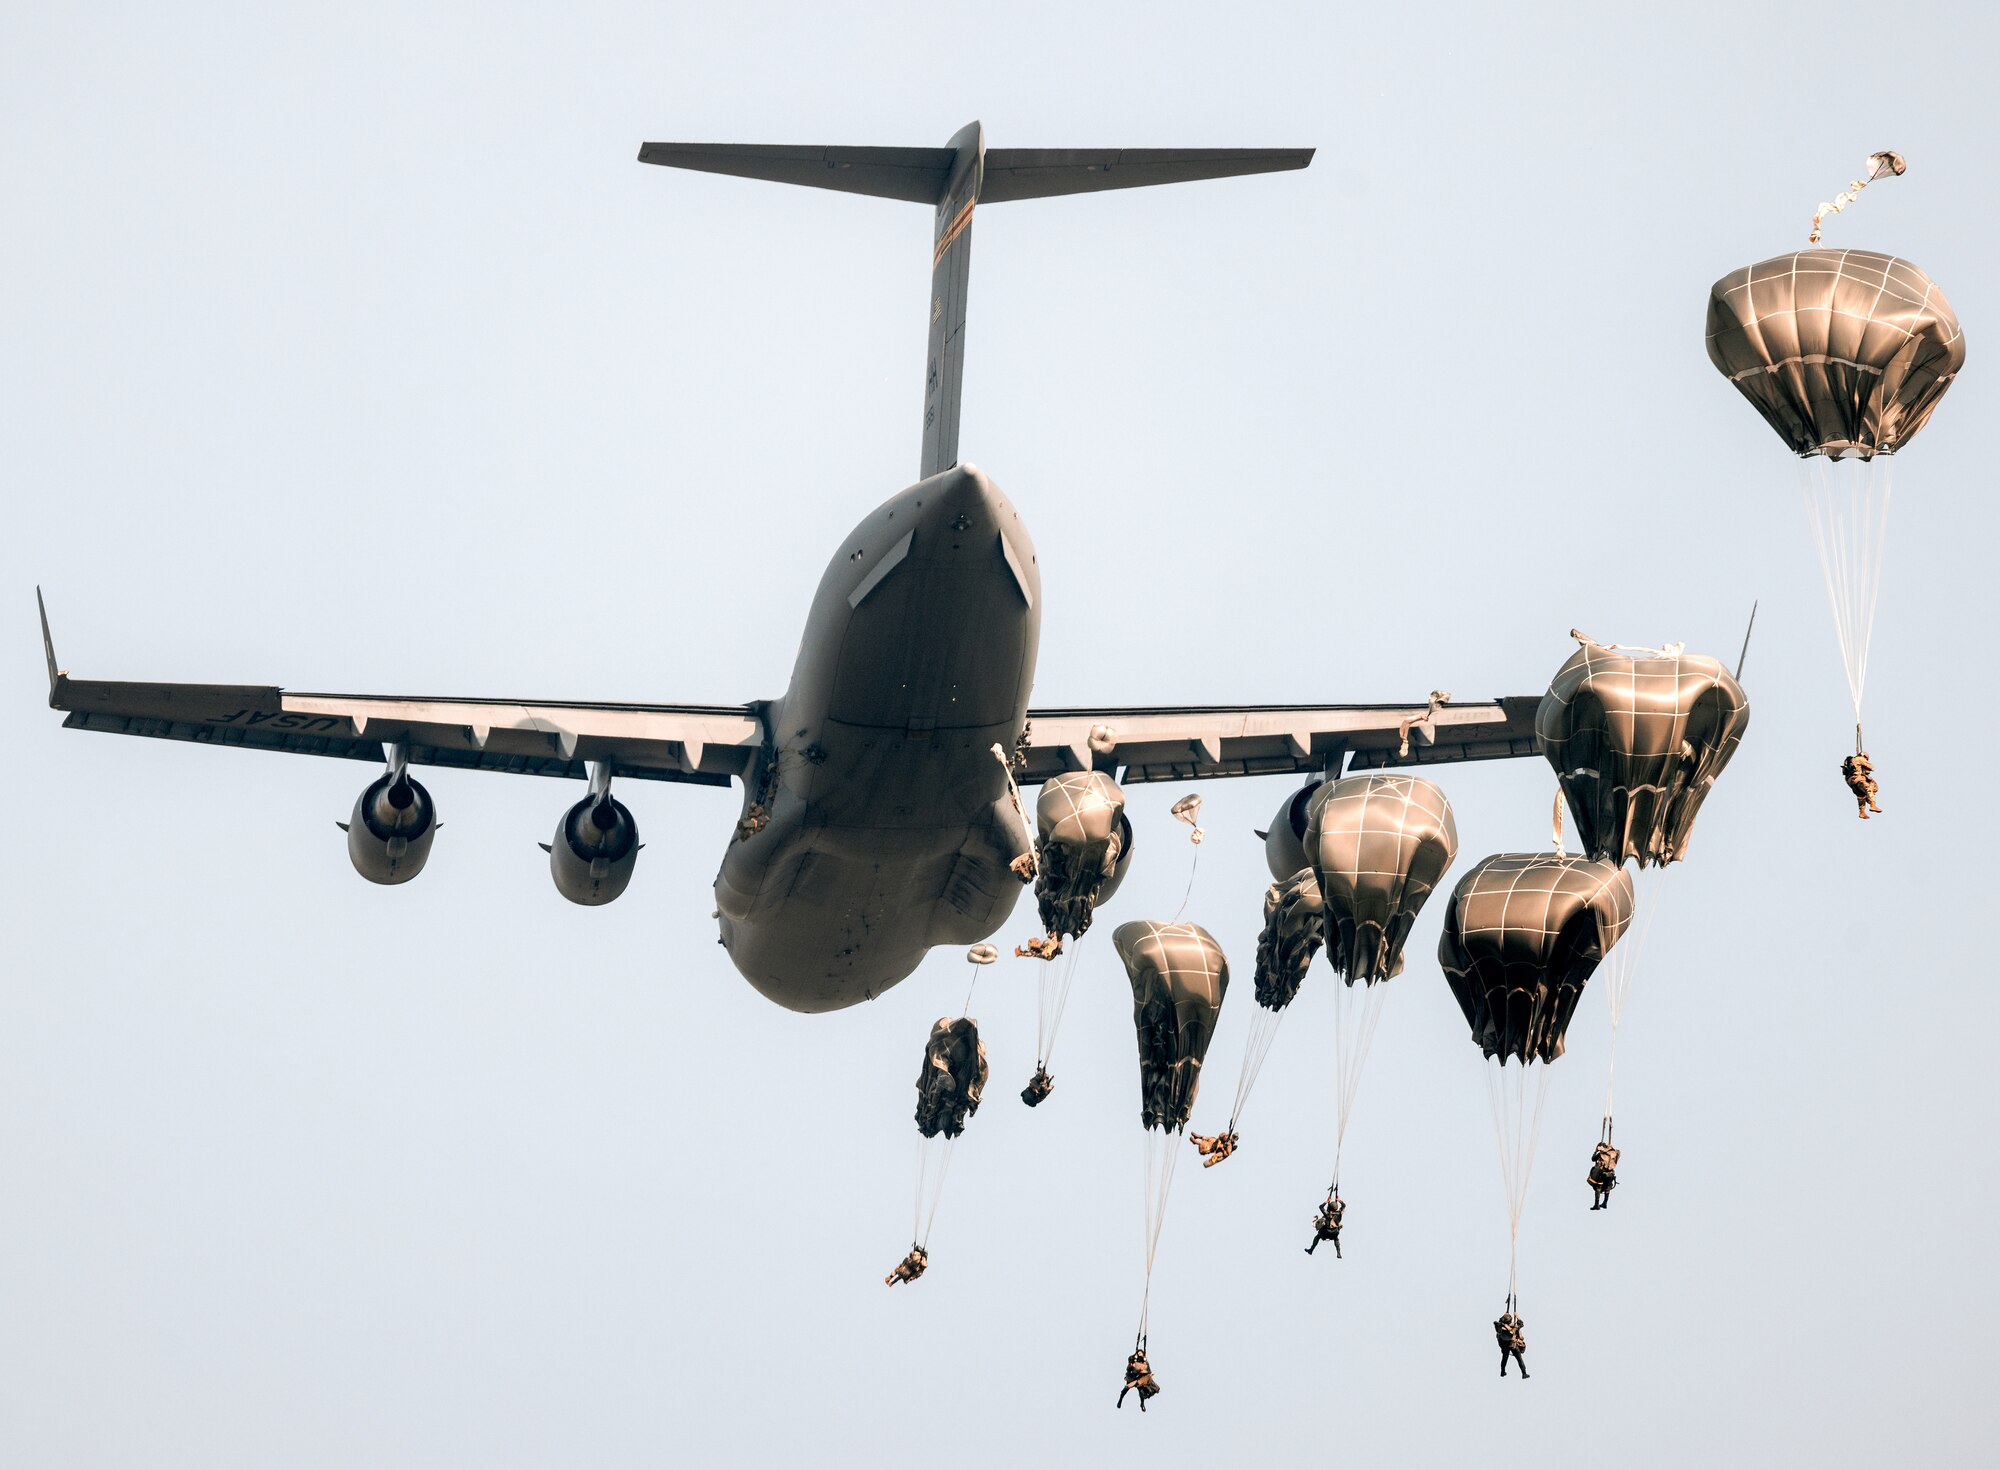 U.S. Army Paratroopers with the 82nd Airborne Division and Royal Thai Army Soldiers conduct a Strategic Airborne Operation during Exercise Cobra Gold 2023, near Thanarat Drop Zone, Kingdom of Thailand, March 2, 2023.